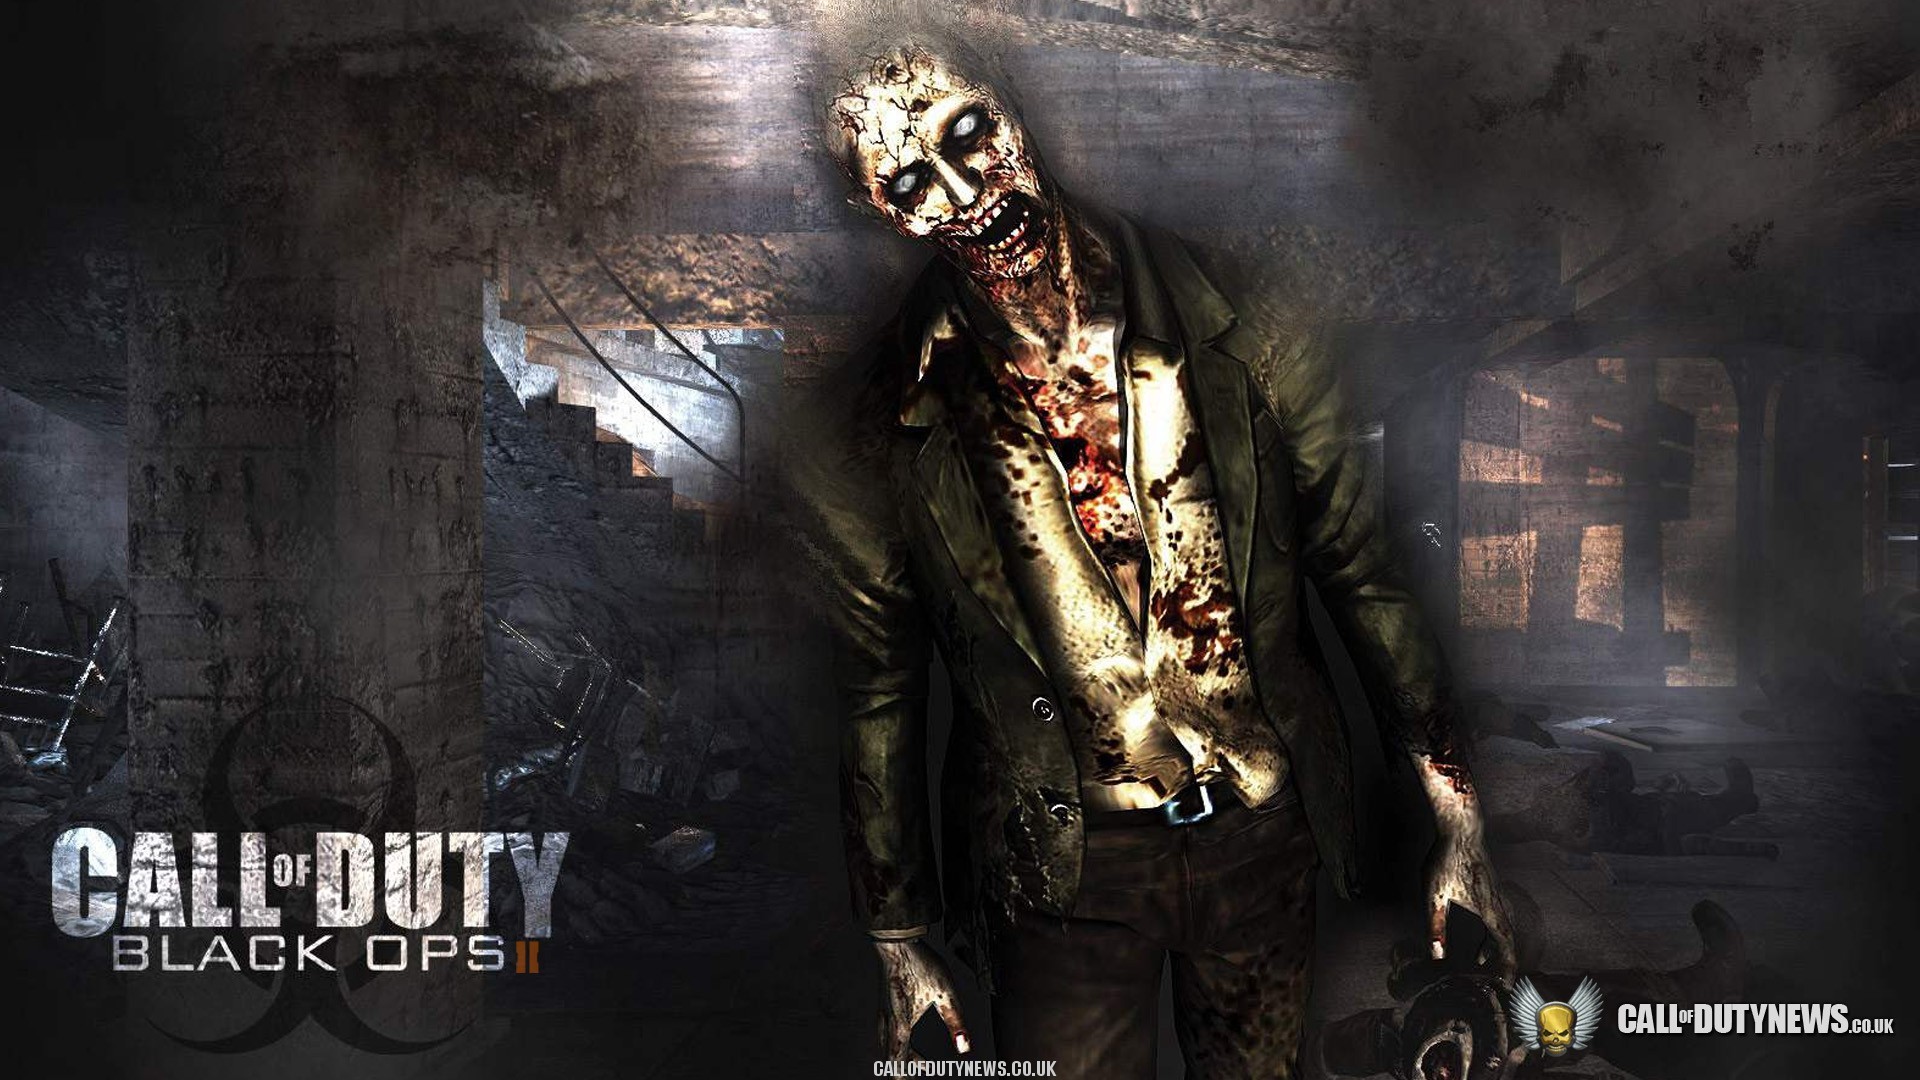 1920x1080 Call Of Duty: Black Ops II Wallpapers Wallpaper Black Ops 2 Wallpapers  Wallpapers)